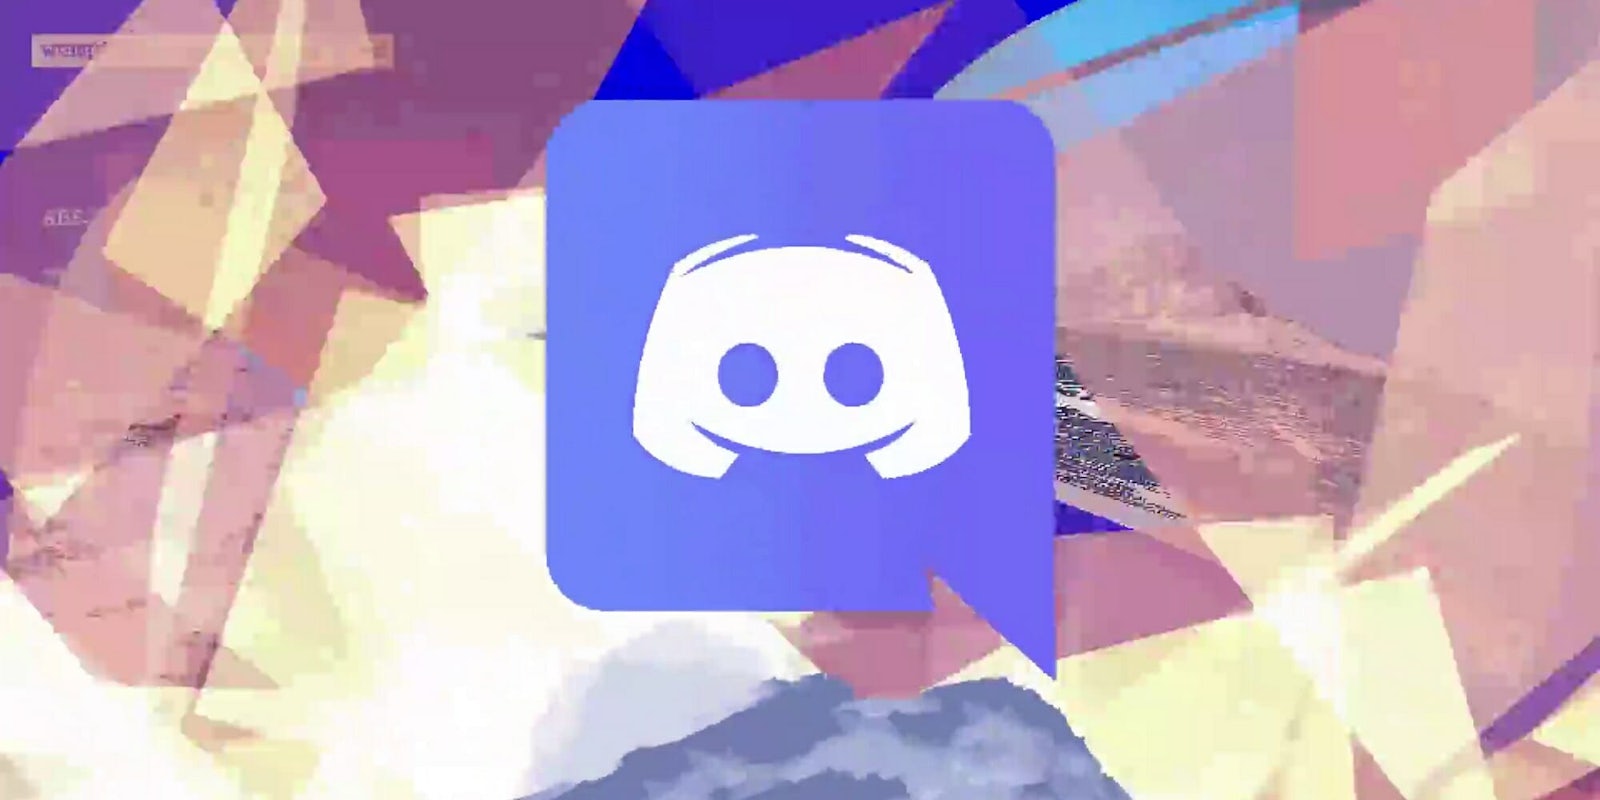 Discord's new ToS limits how users can sue the company. That's troubling.